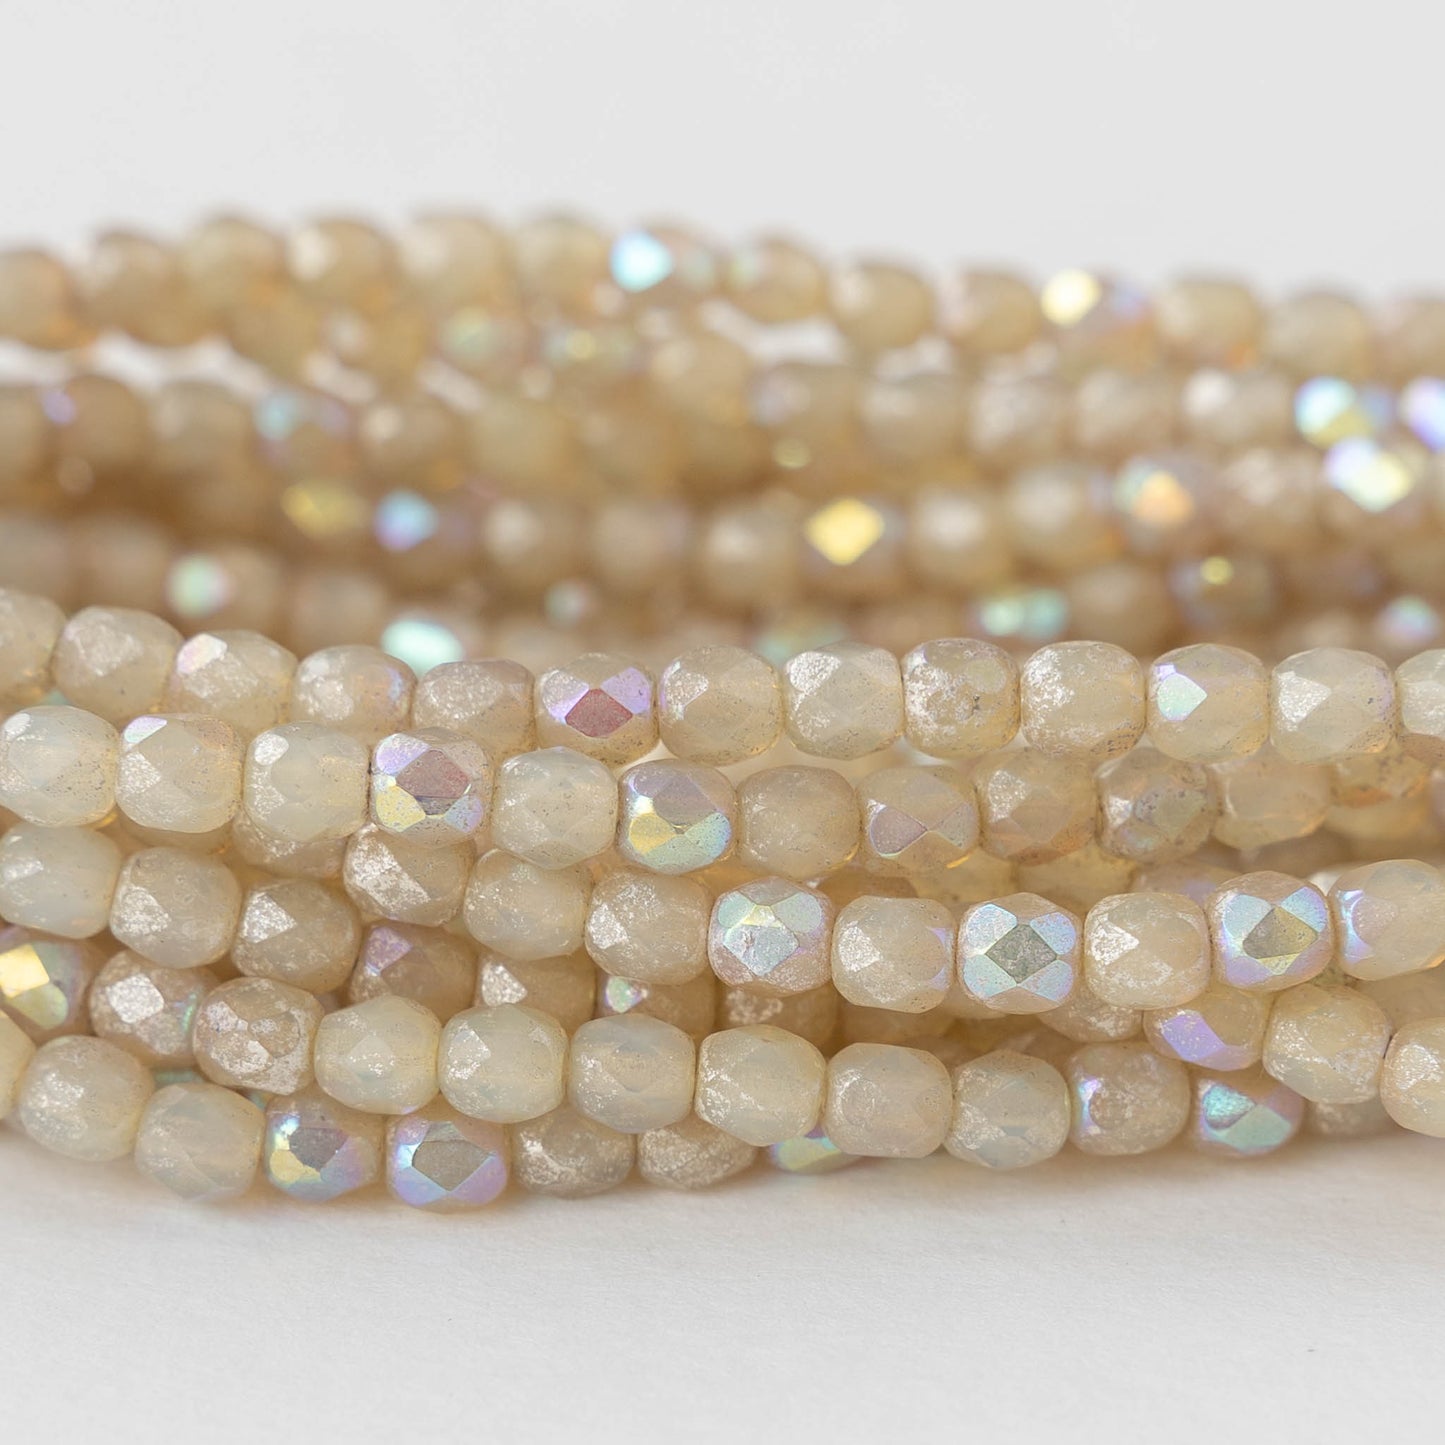 4mm Round Beads - Ivory AB with Silver Dust - 50 beads